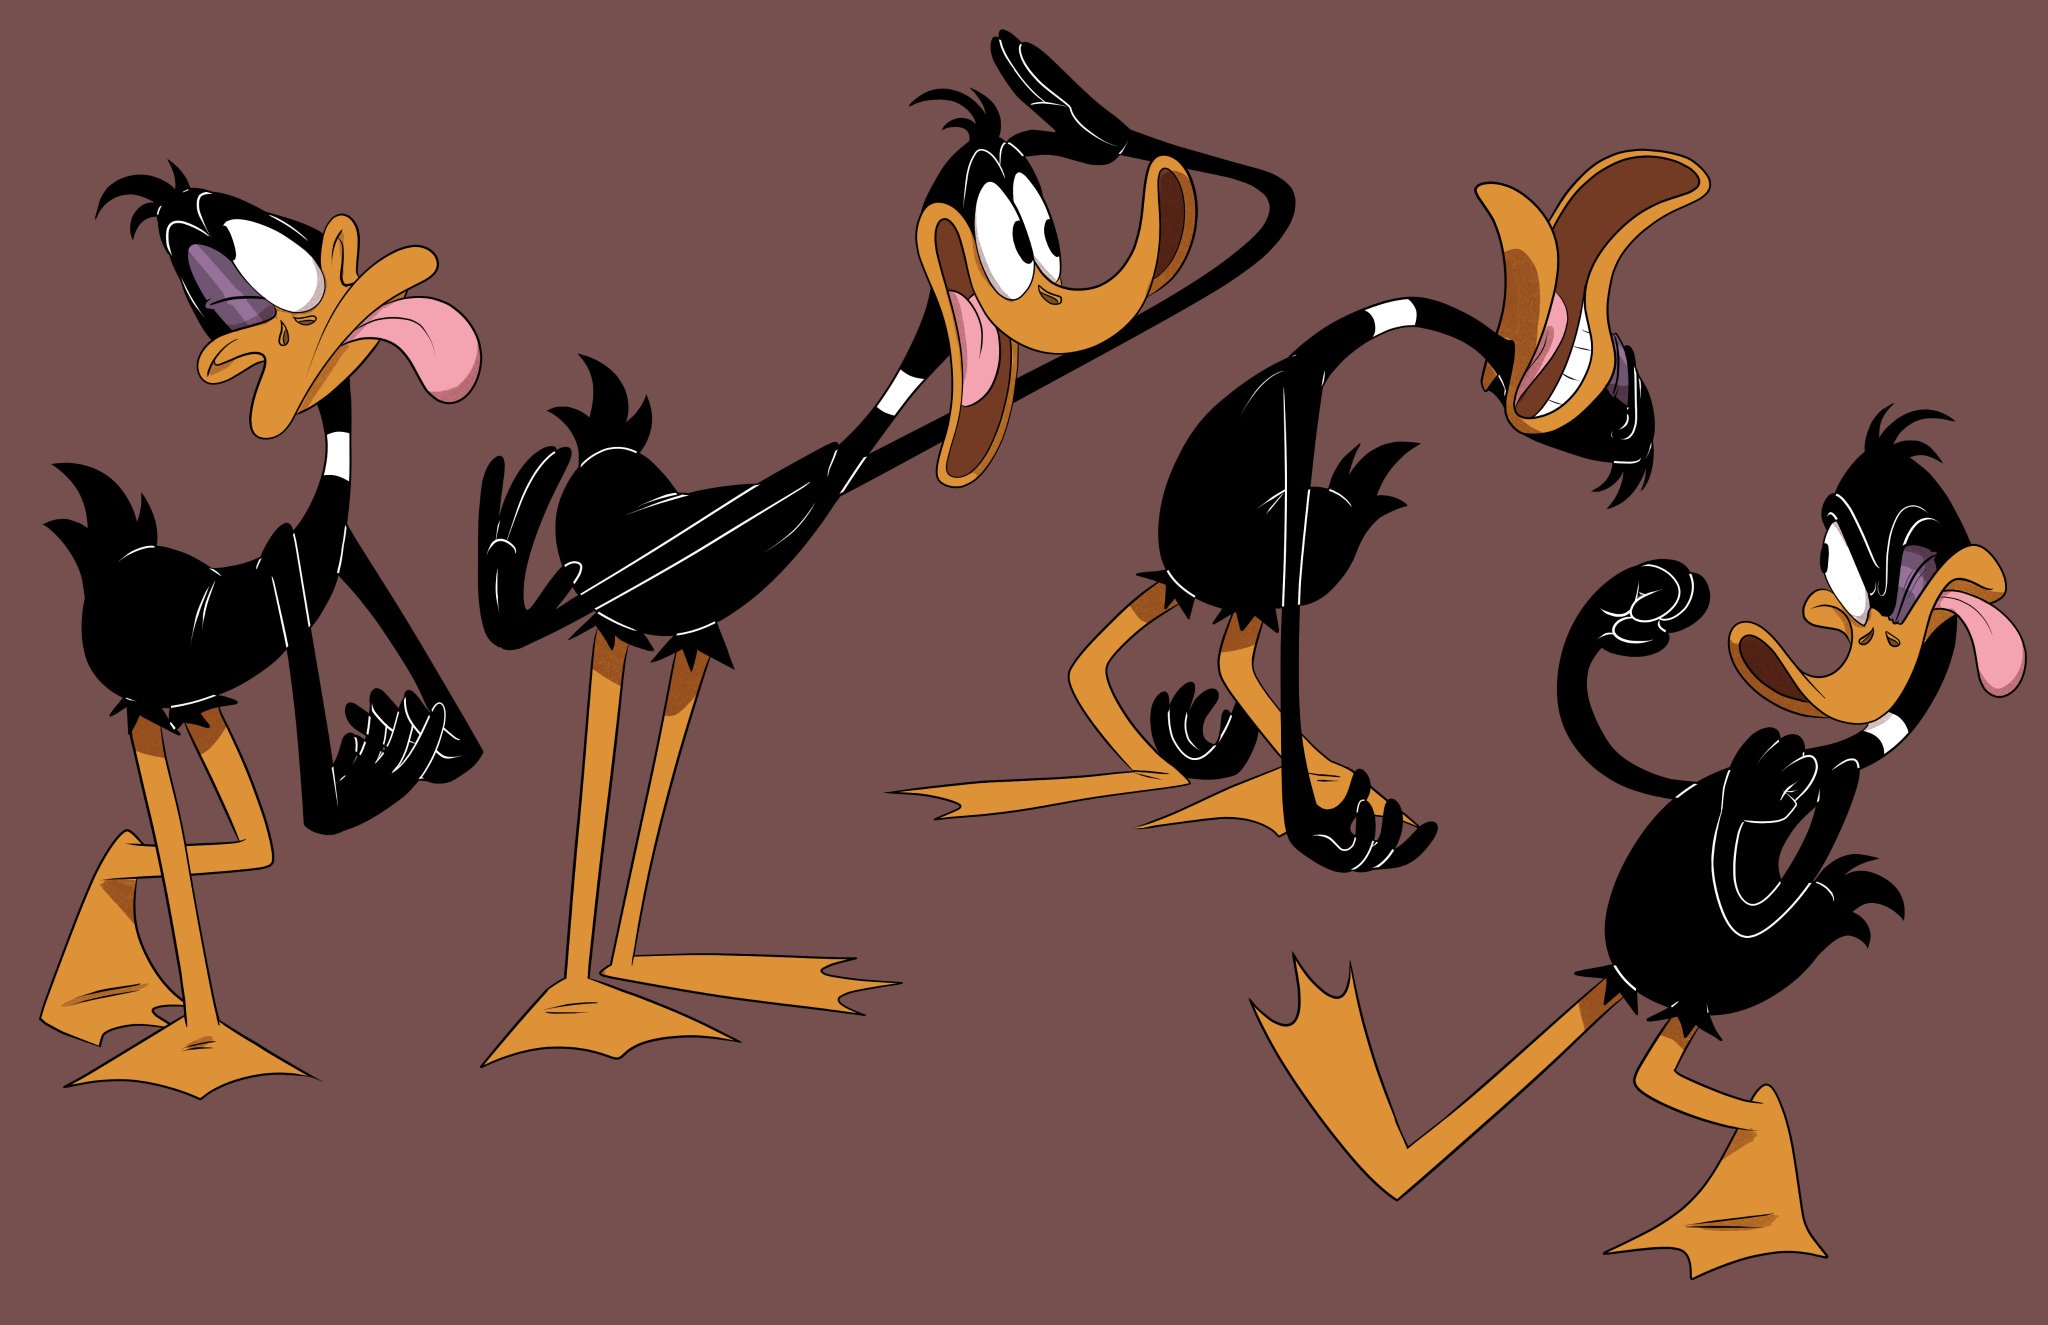 “Daffy Ducks from memory bc I'm always thinkin about those dang #L...